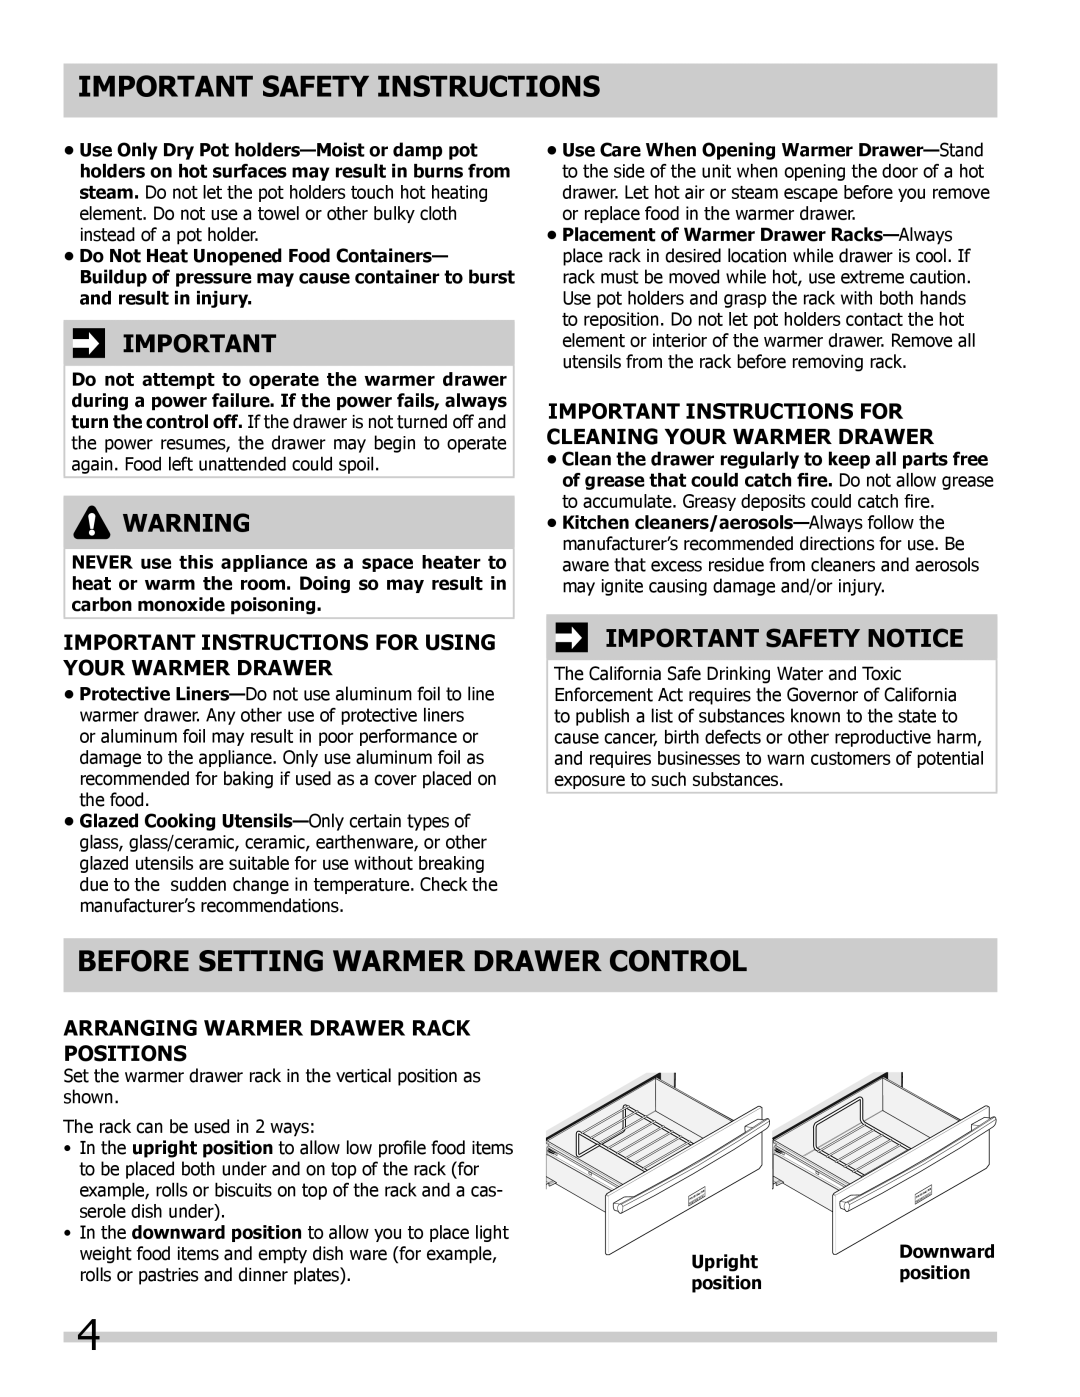 Frigidaire 318201024 before setting WARMER DRAWER control, Important Safety Notice, Important Safety Instructions 